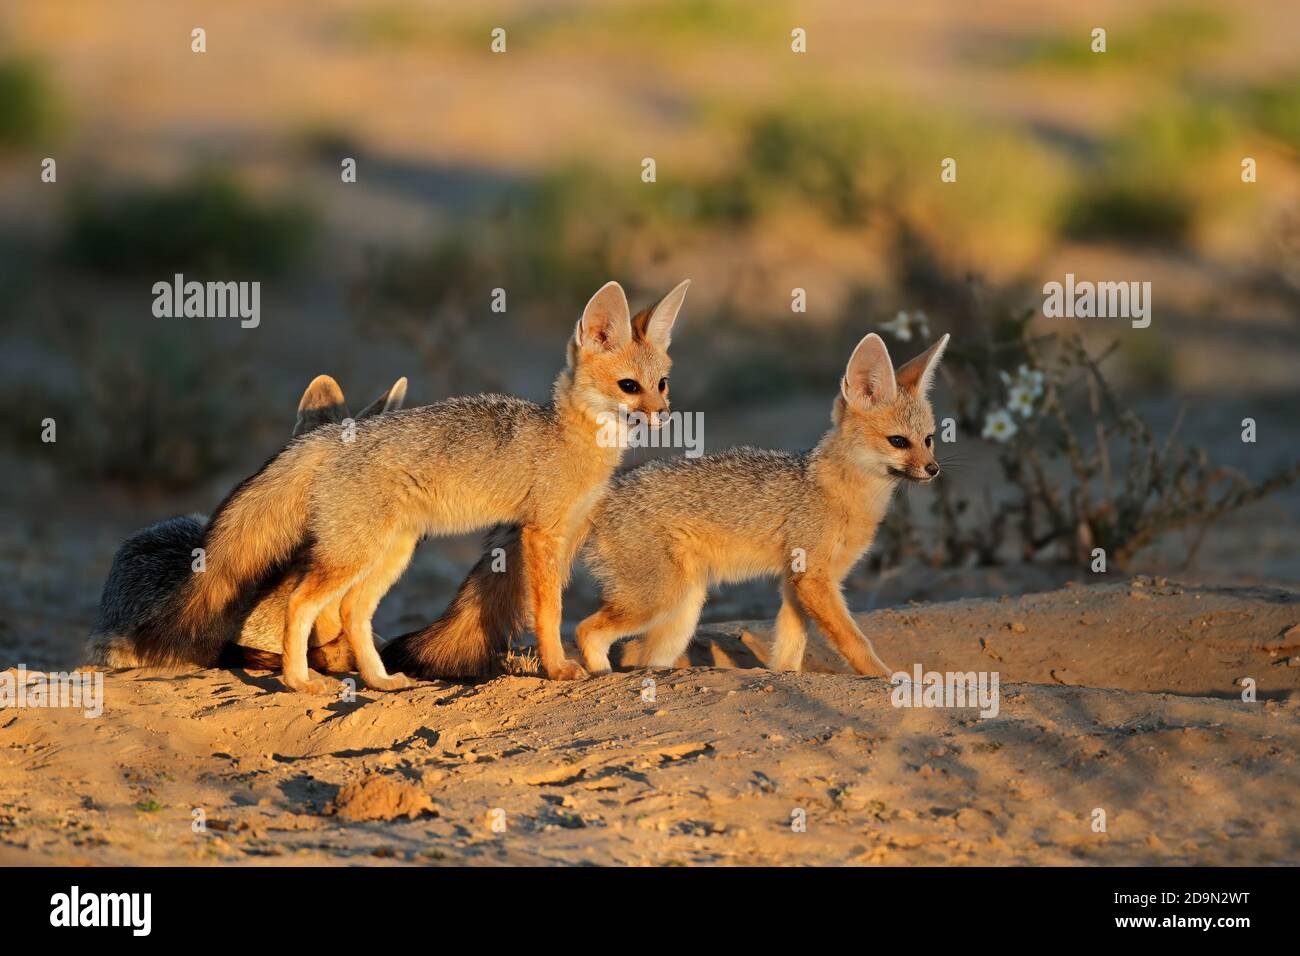 Cape foxes (Vulpes chama) at their den in early morning light, Kalahari desert, South Africa Stock Photo